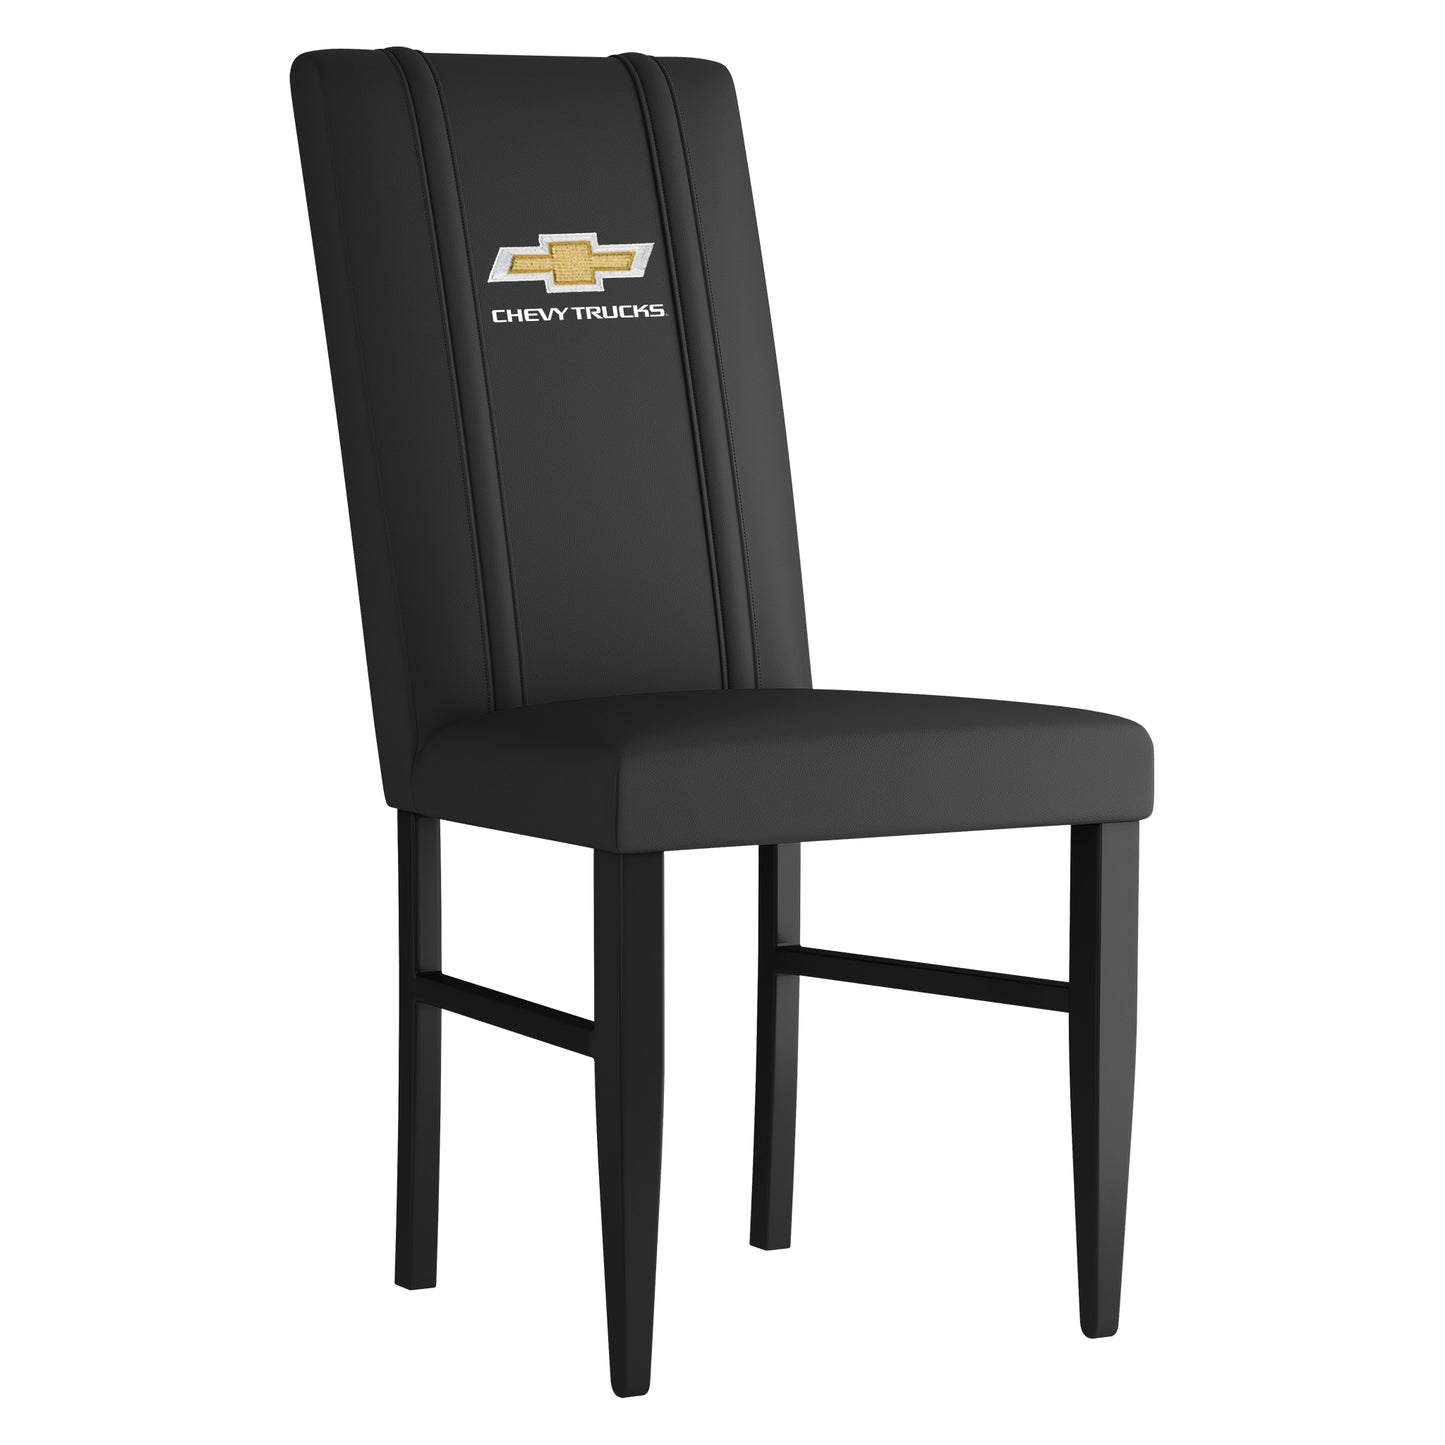 Side Chair 2000 with Chevy Trucks Logo Set of 2